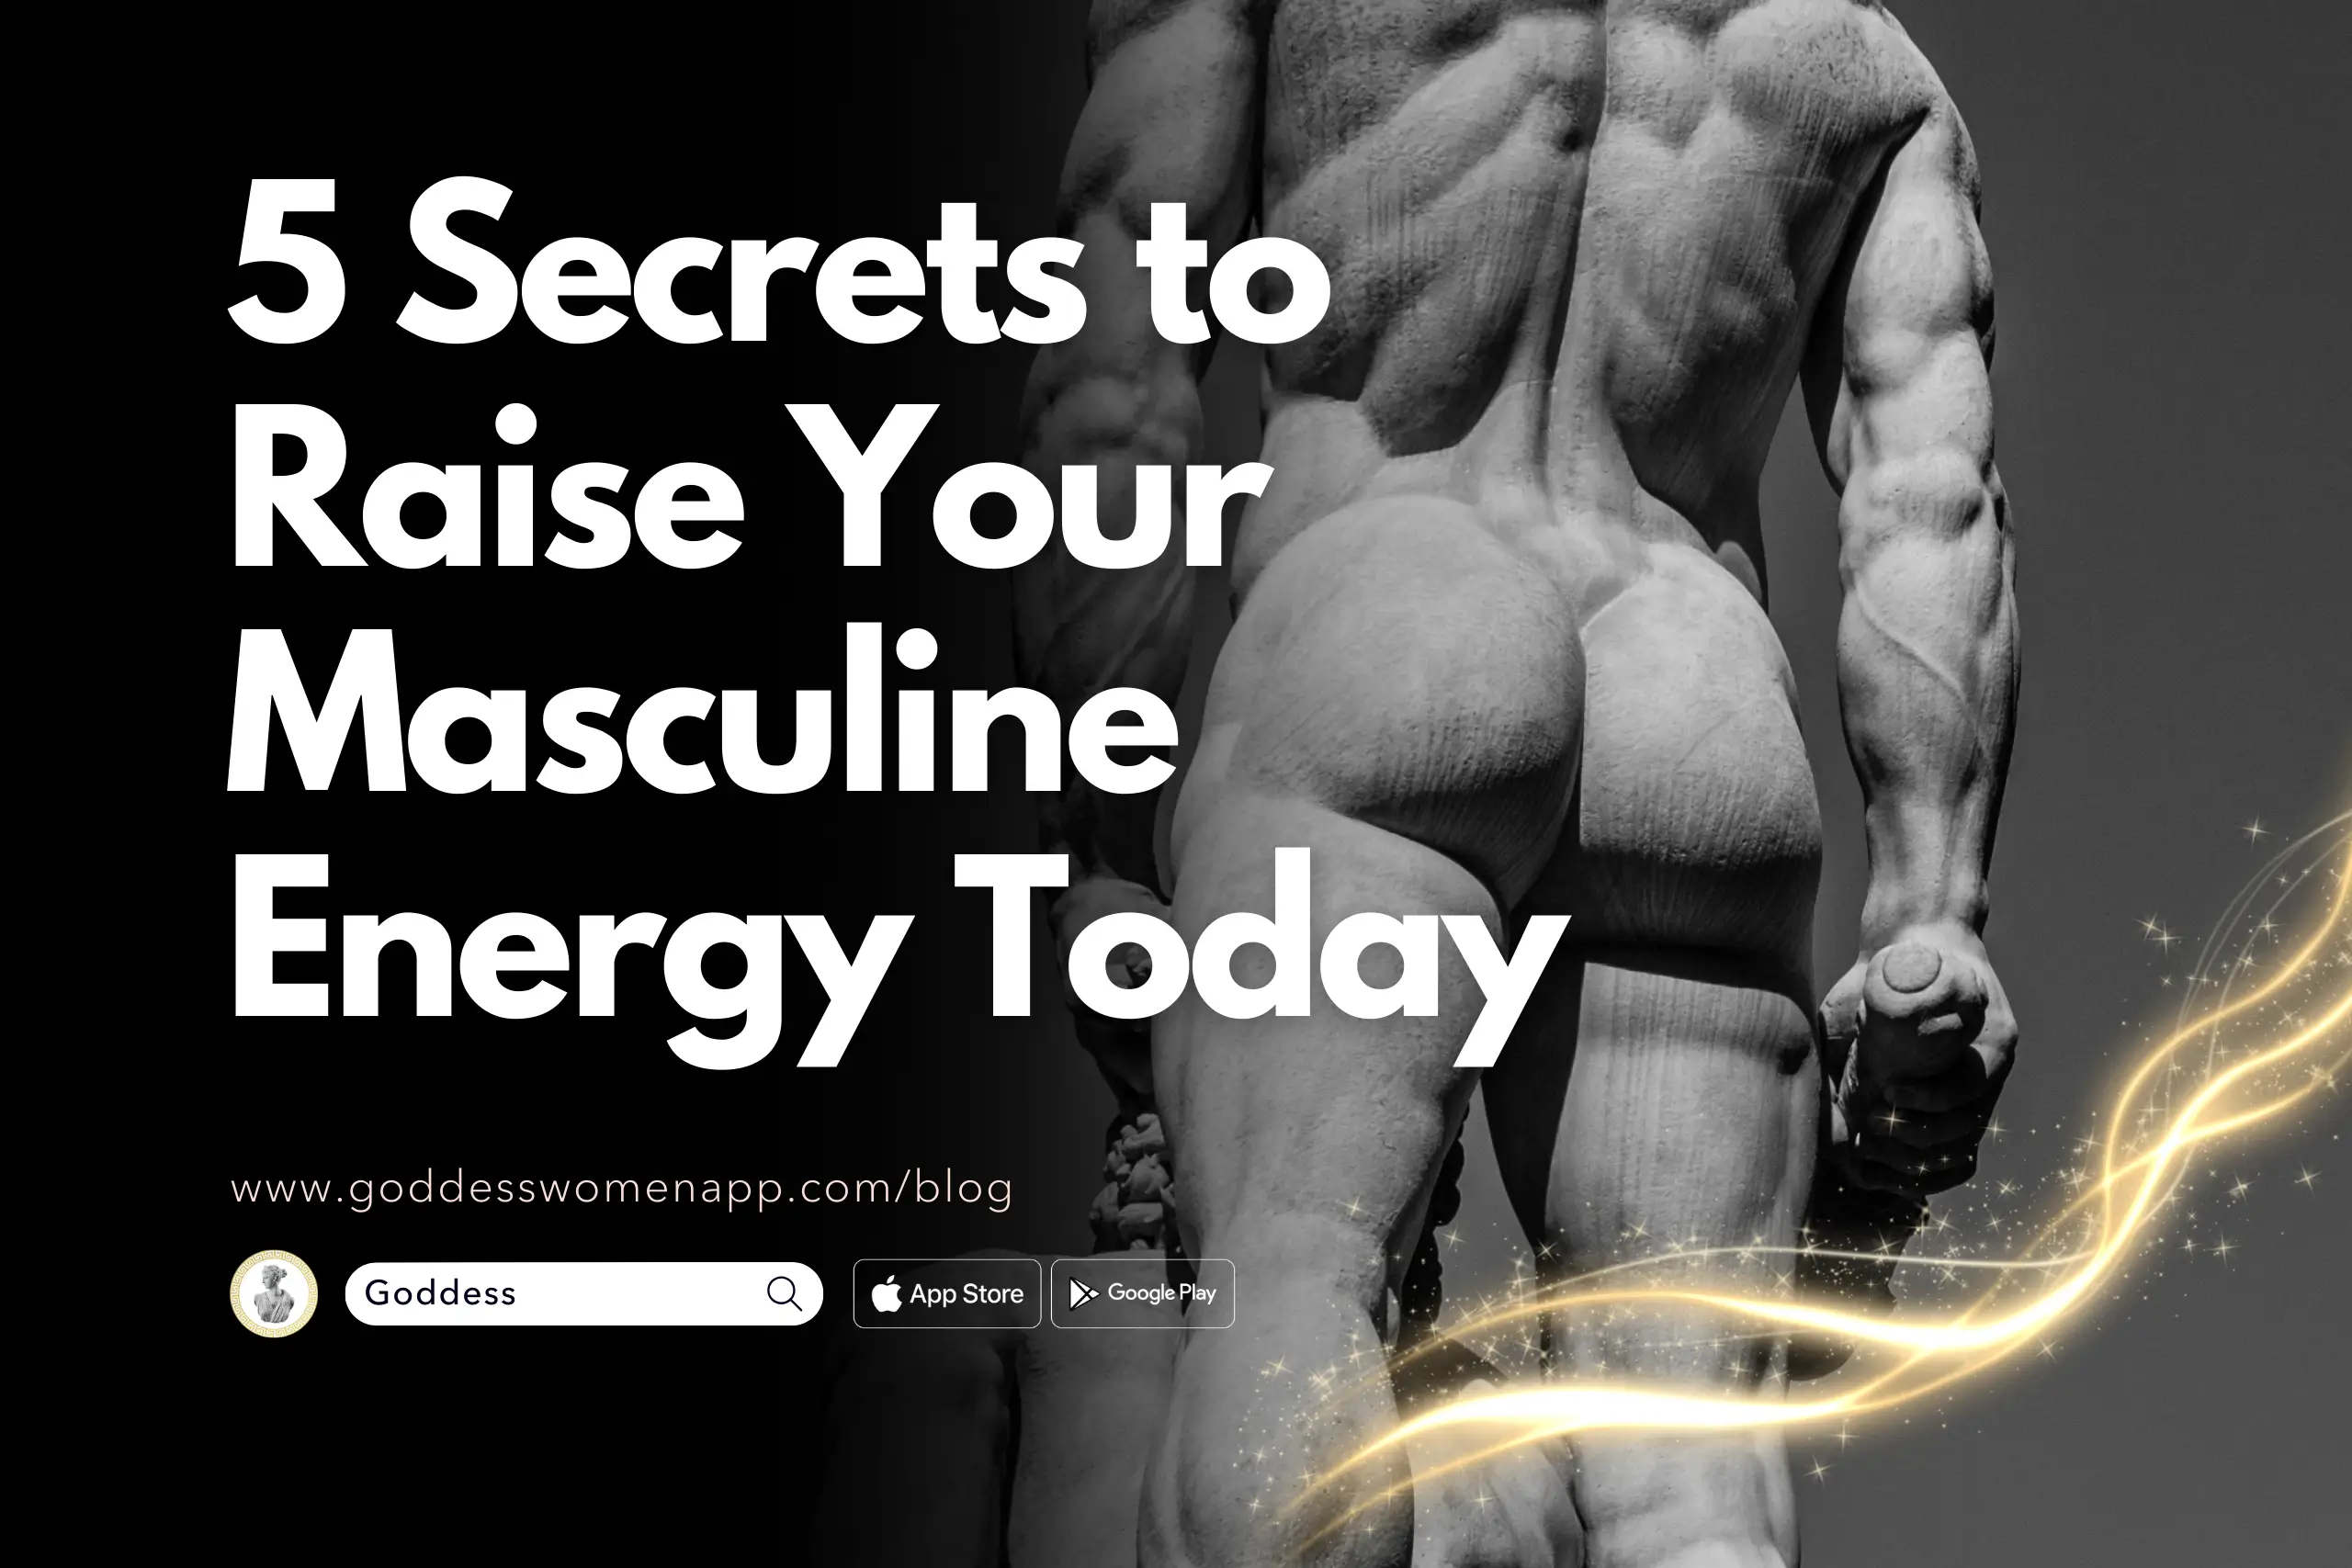 5 Secrets to Raise Your Masculine Energy Today